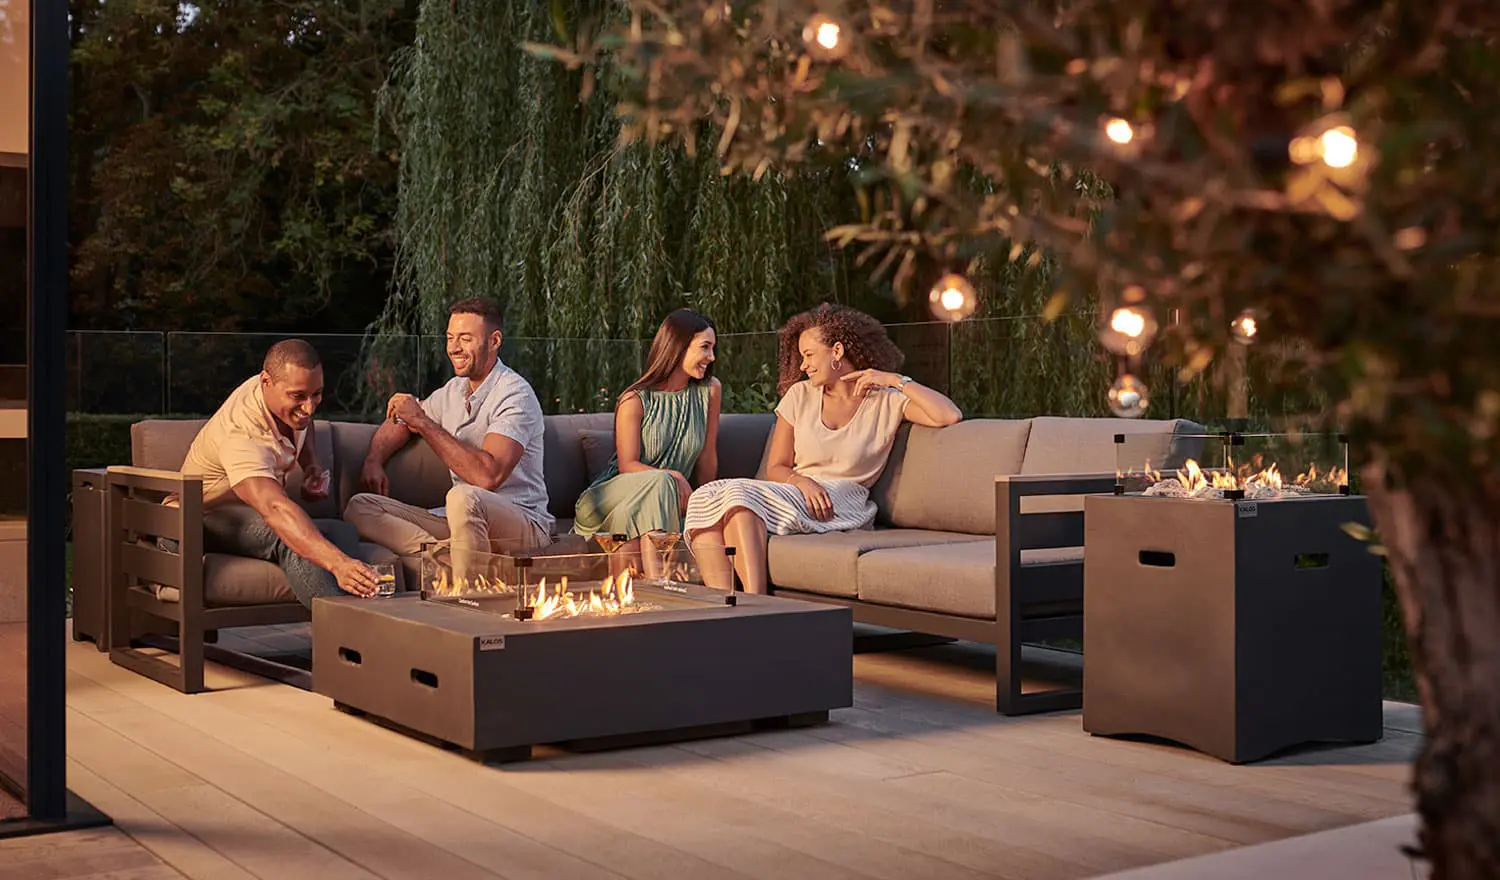 casual dining set with fire pit on patio at night